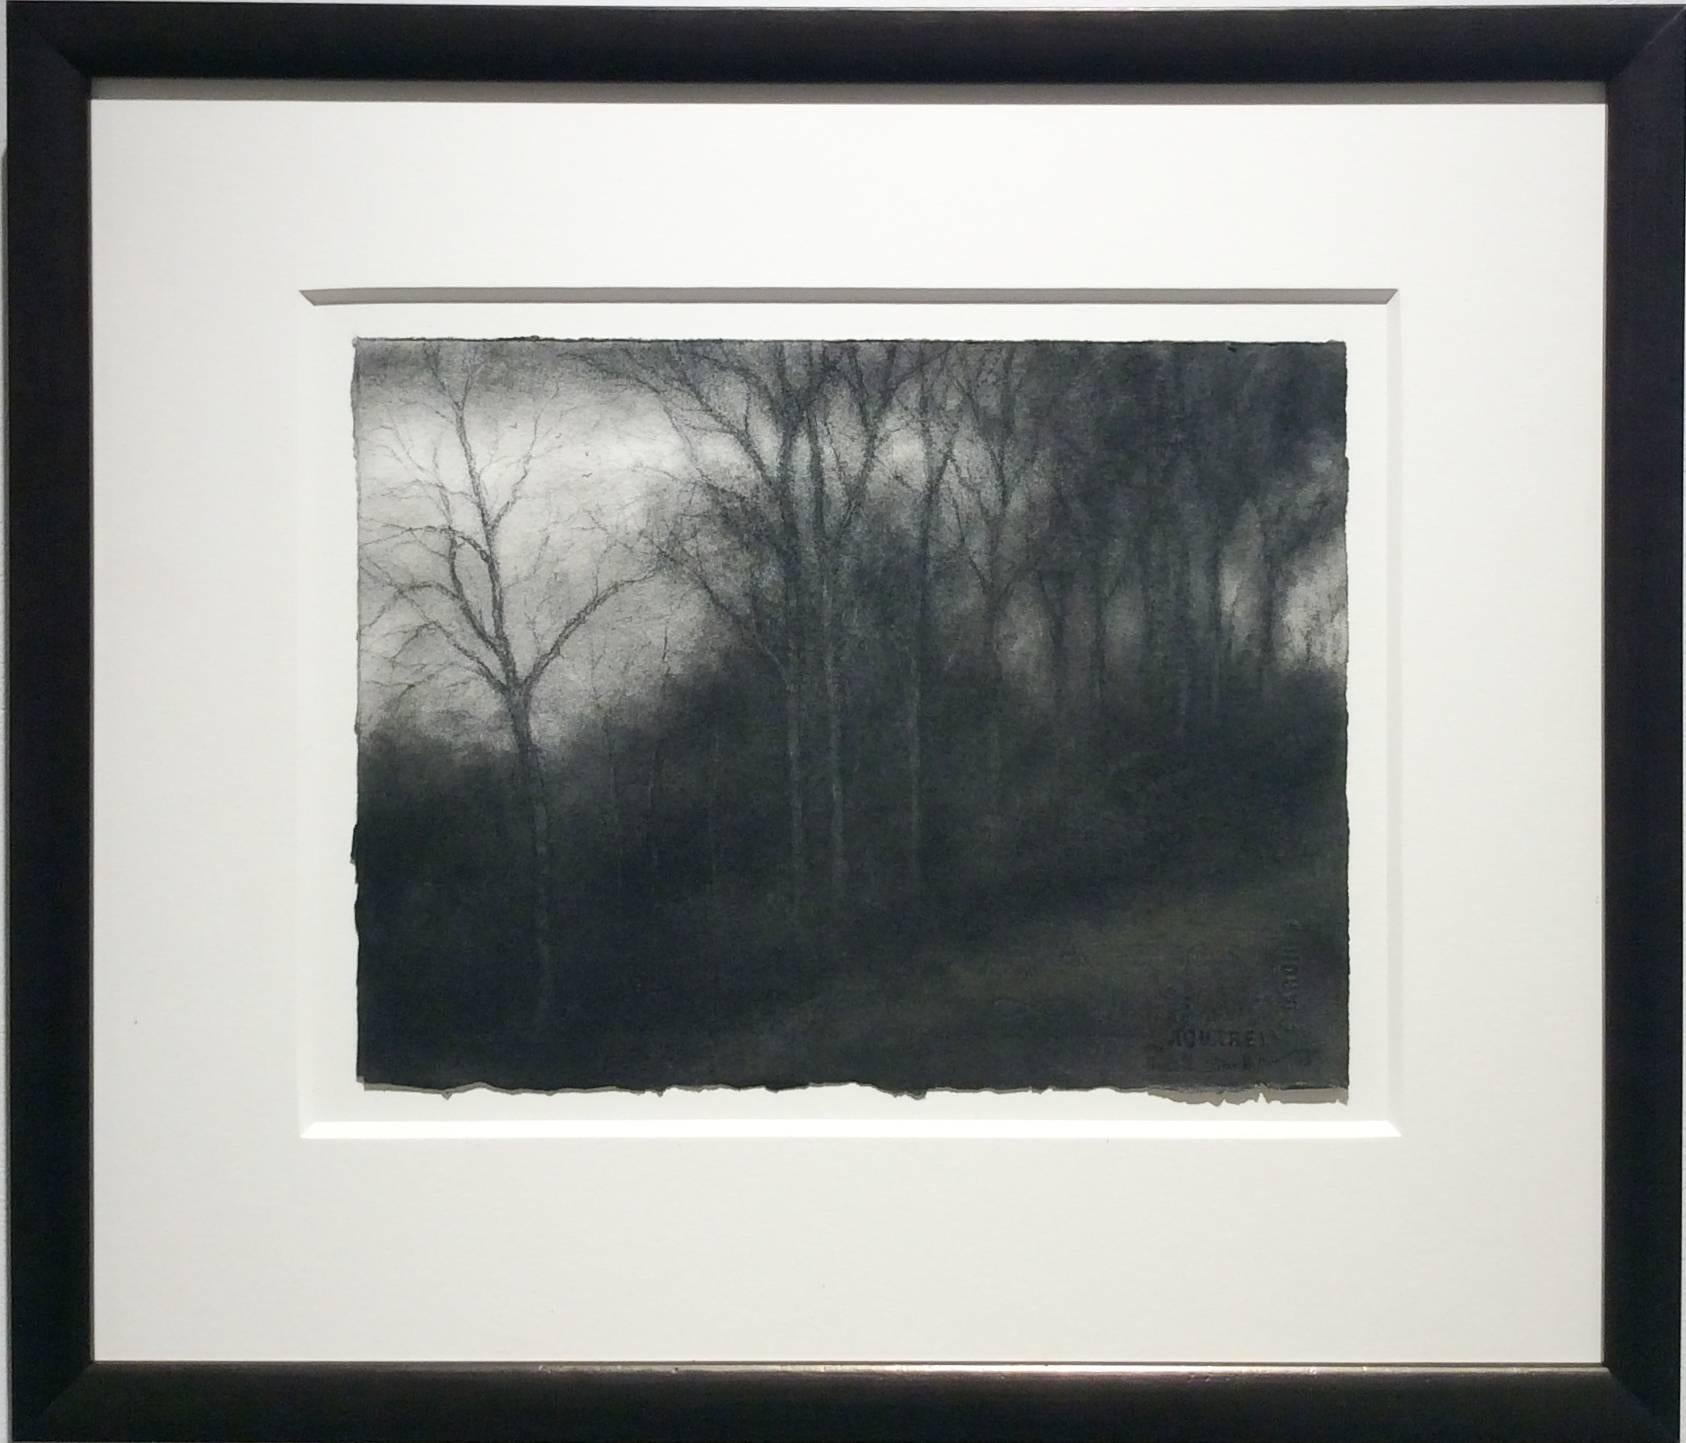 Hillside, Hudson (Realistic Charcoal Landscape Drawing of Trees in a Forest) - Art by Sue Bryan